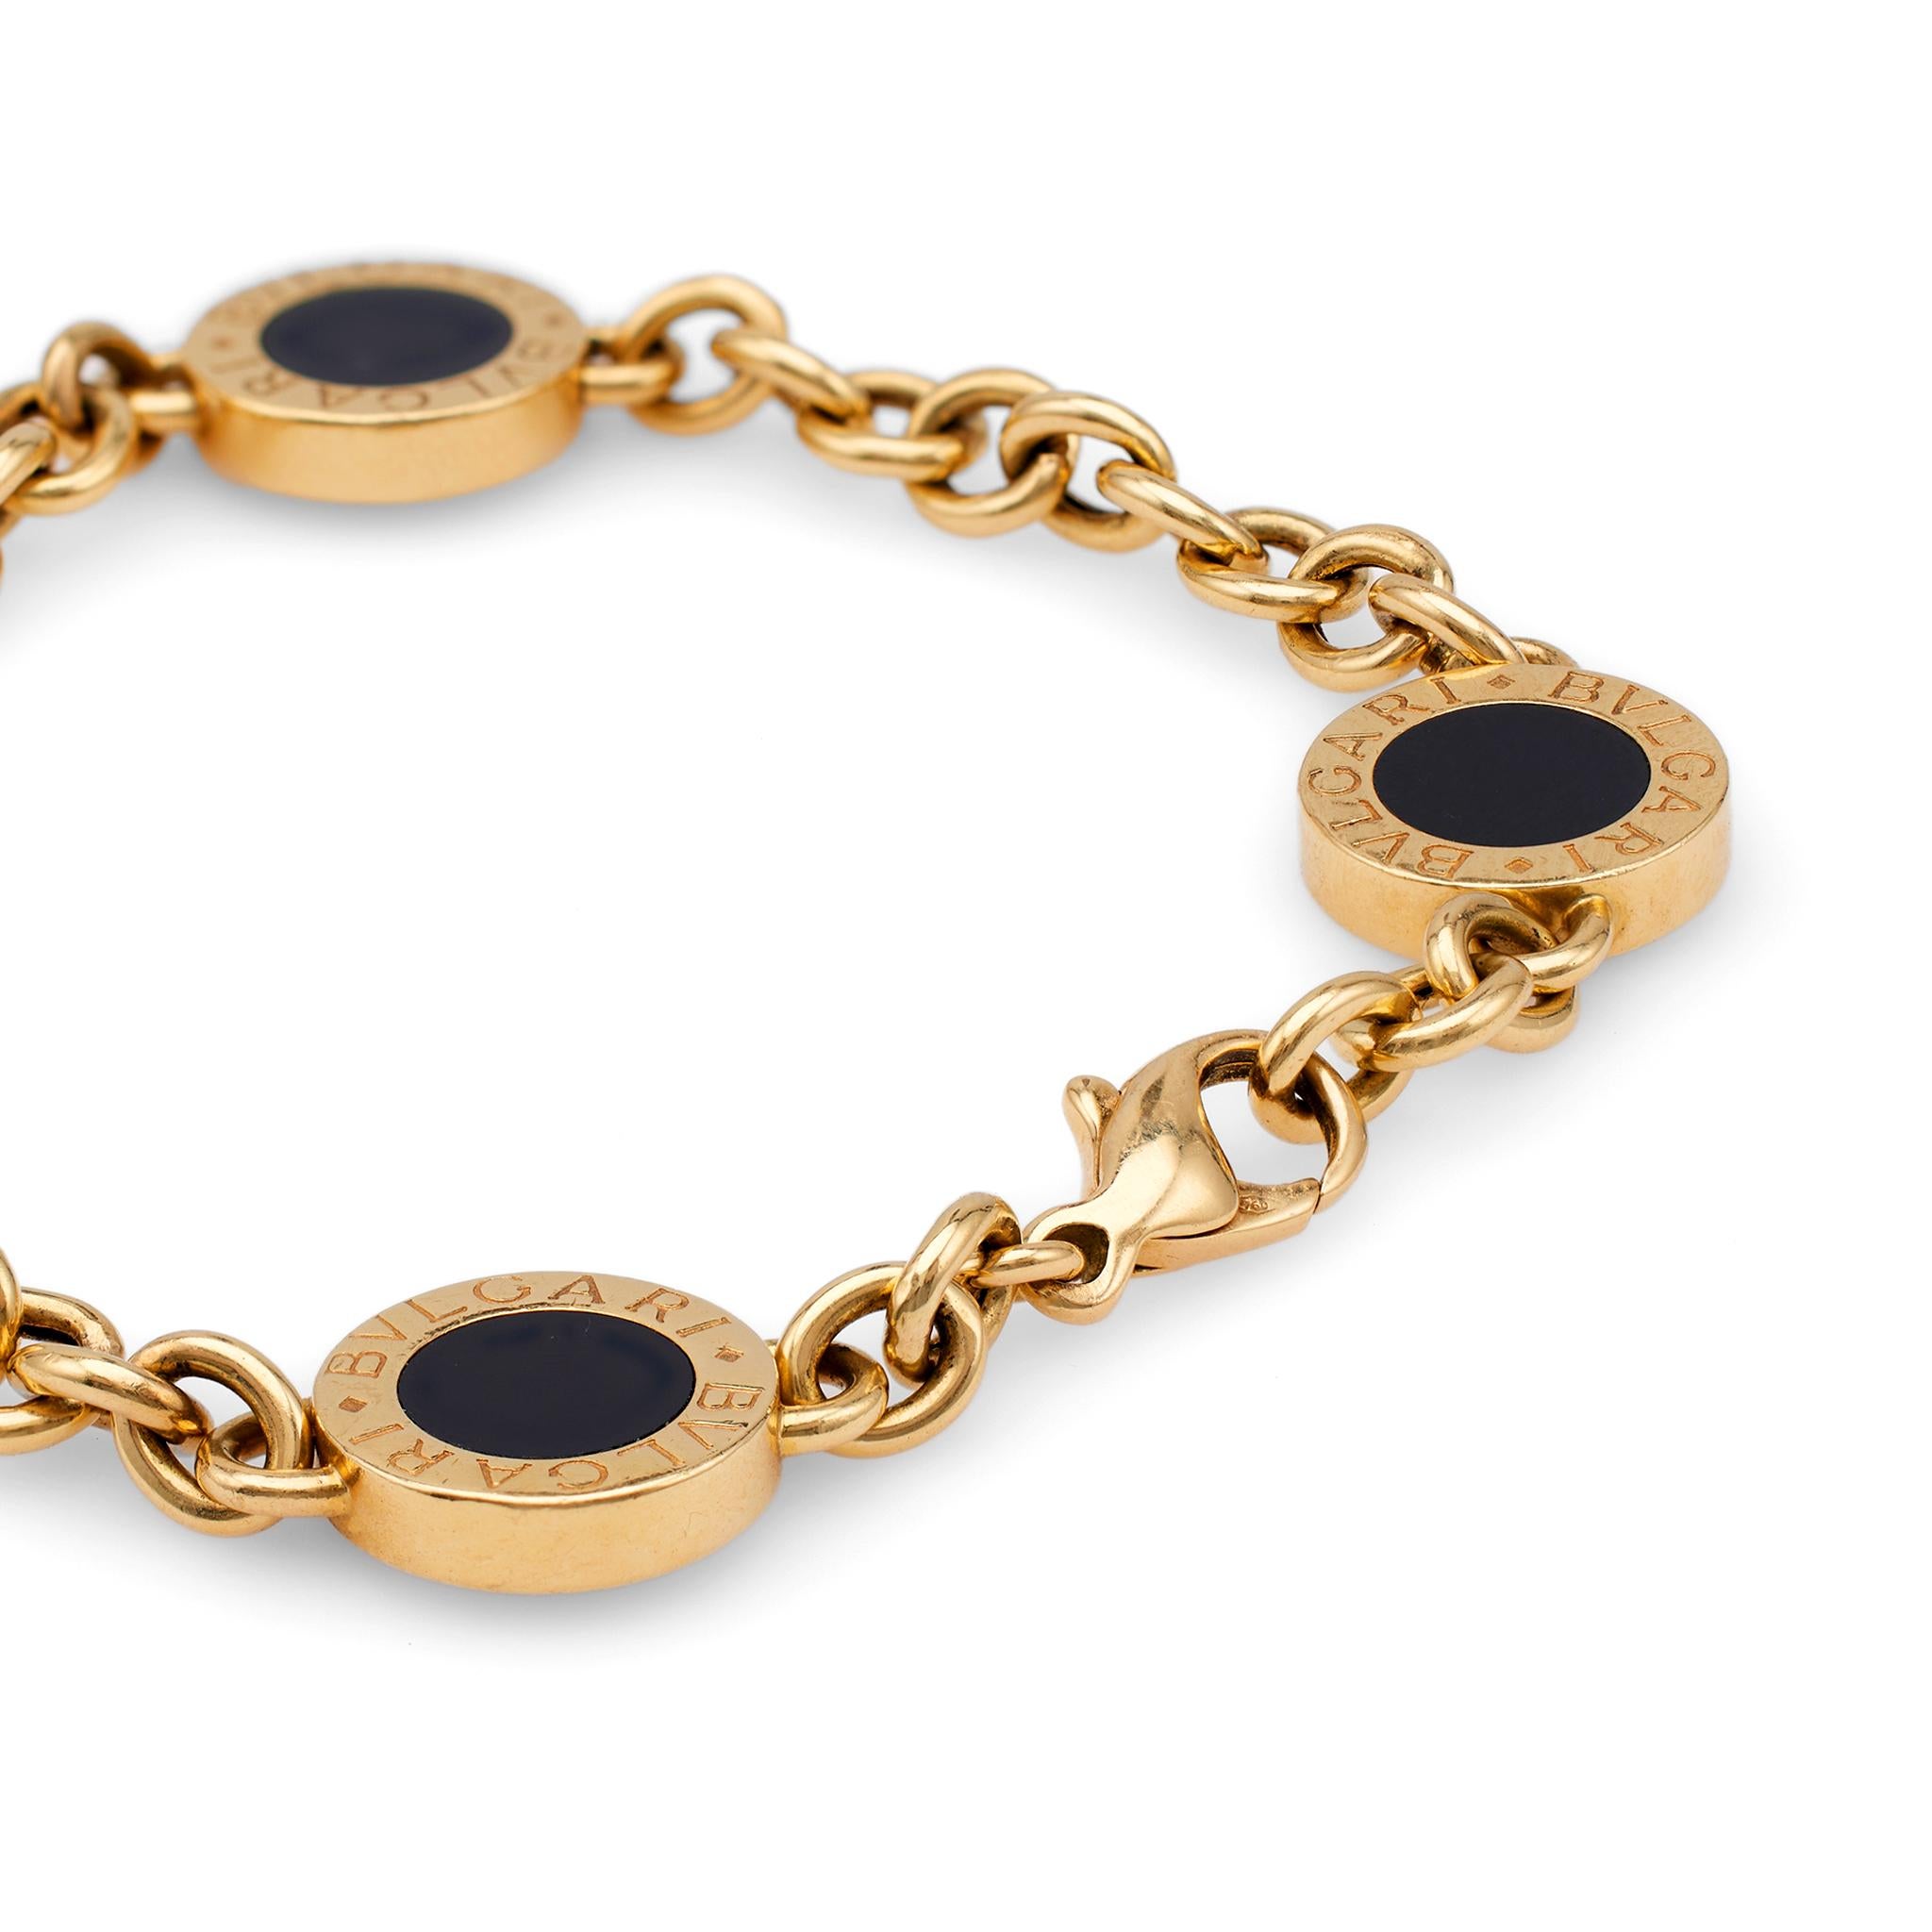 Vintage Bvlgari Italy Onyx 18k Yellow Gold Bracelet In Excellent Condition For Sale In Beverly Hills, CA